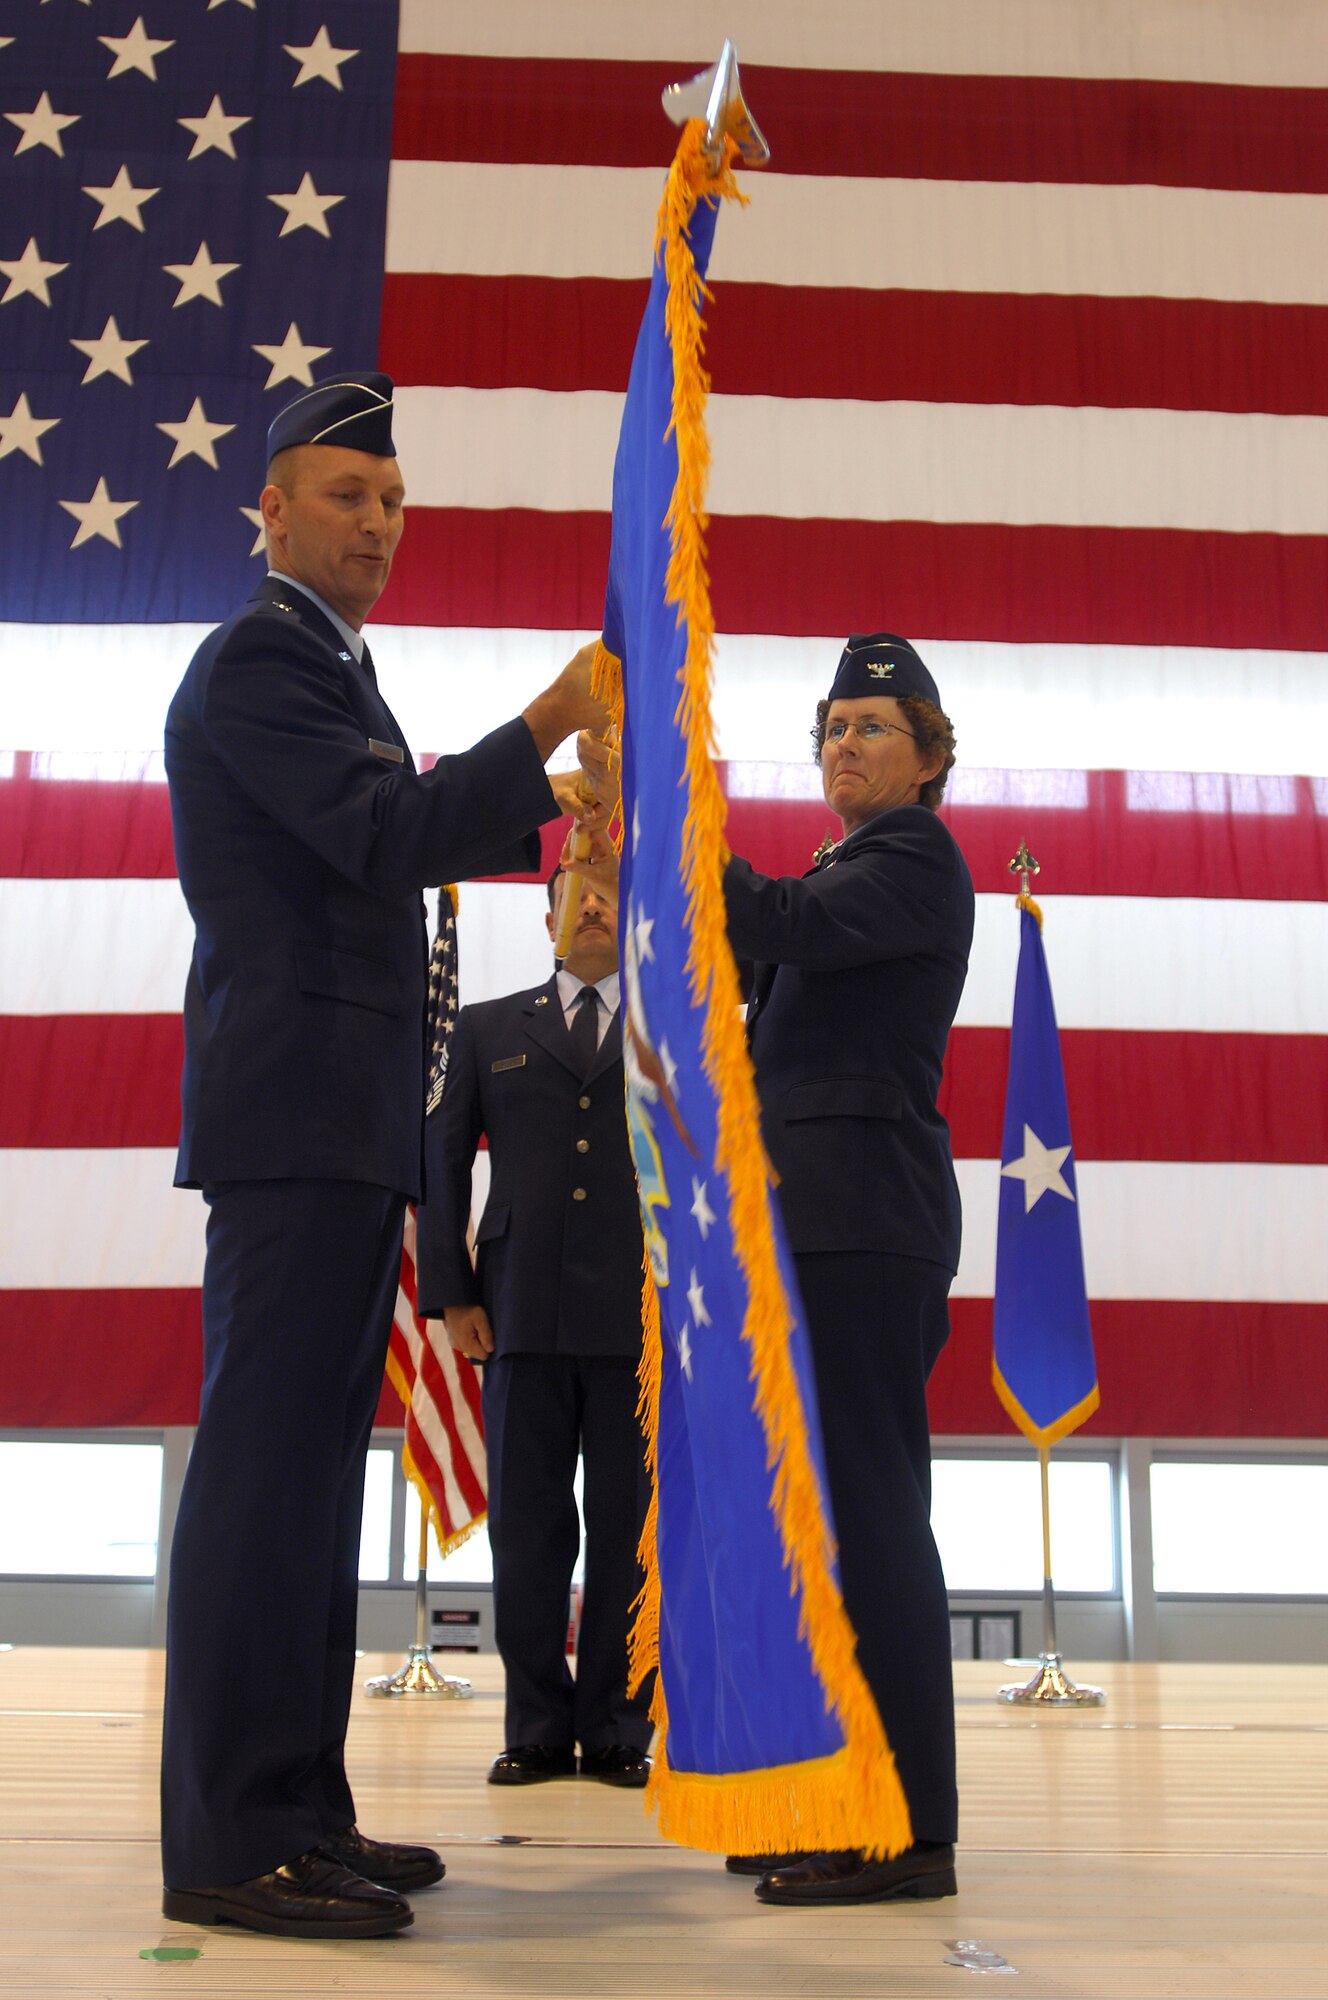 United States Air Force Brig. Gen. Timothy M. Zadalis (left), 21st Expeditionary Mobility Task Force commander, passes the guideon to Col. Kimberly J. Corcoran, new Commander of the 521st Air Mobility Operations Wing, during an activation of command ceremony, Ramstein Air Base, Germany, Sept. 4, 2008. (U.S. Air Force photo by Airman 1st Class Kenny Holston)(Released)